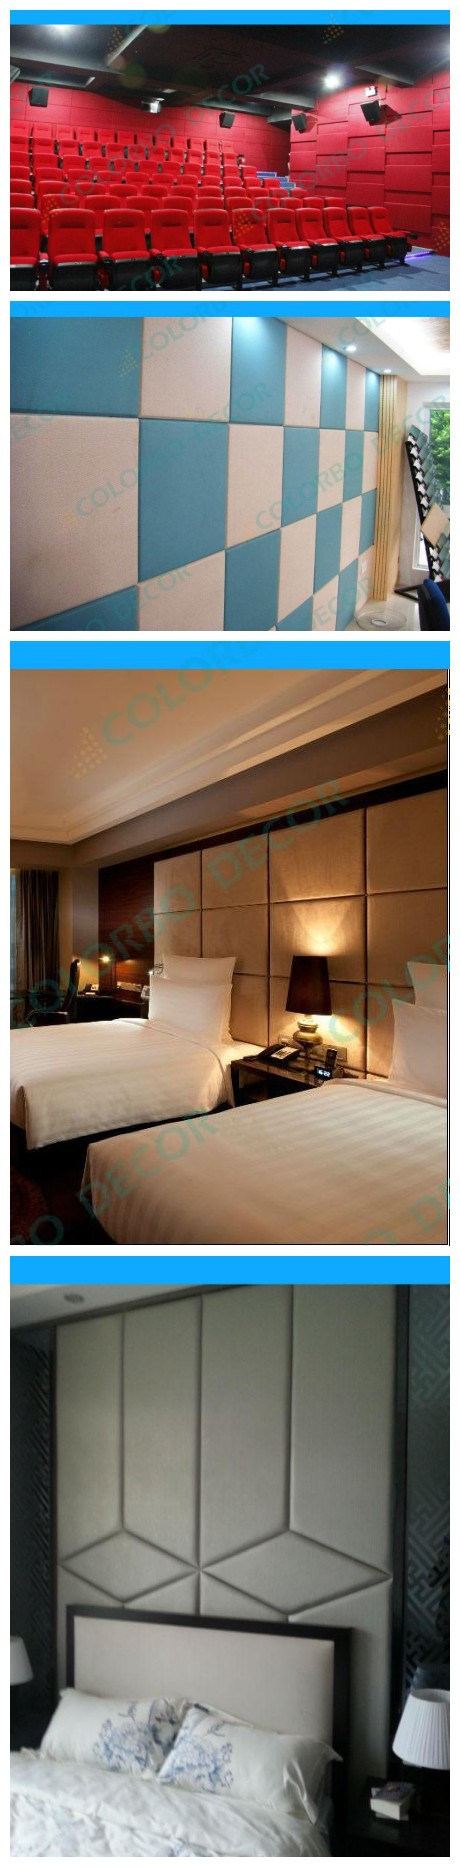 High Density Fireproof Fabric Acoustic Wall Decor Panel